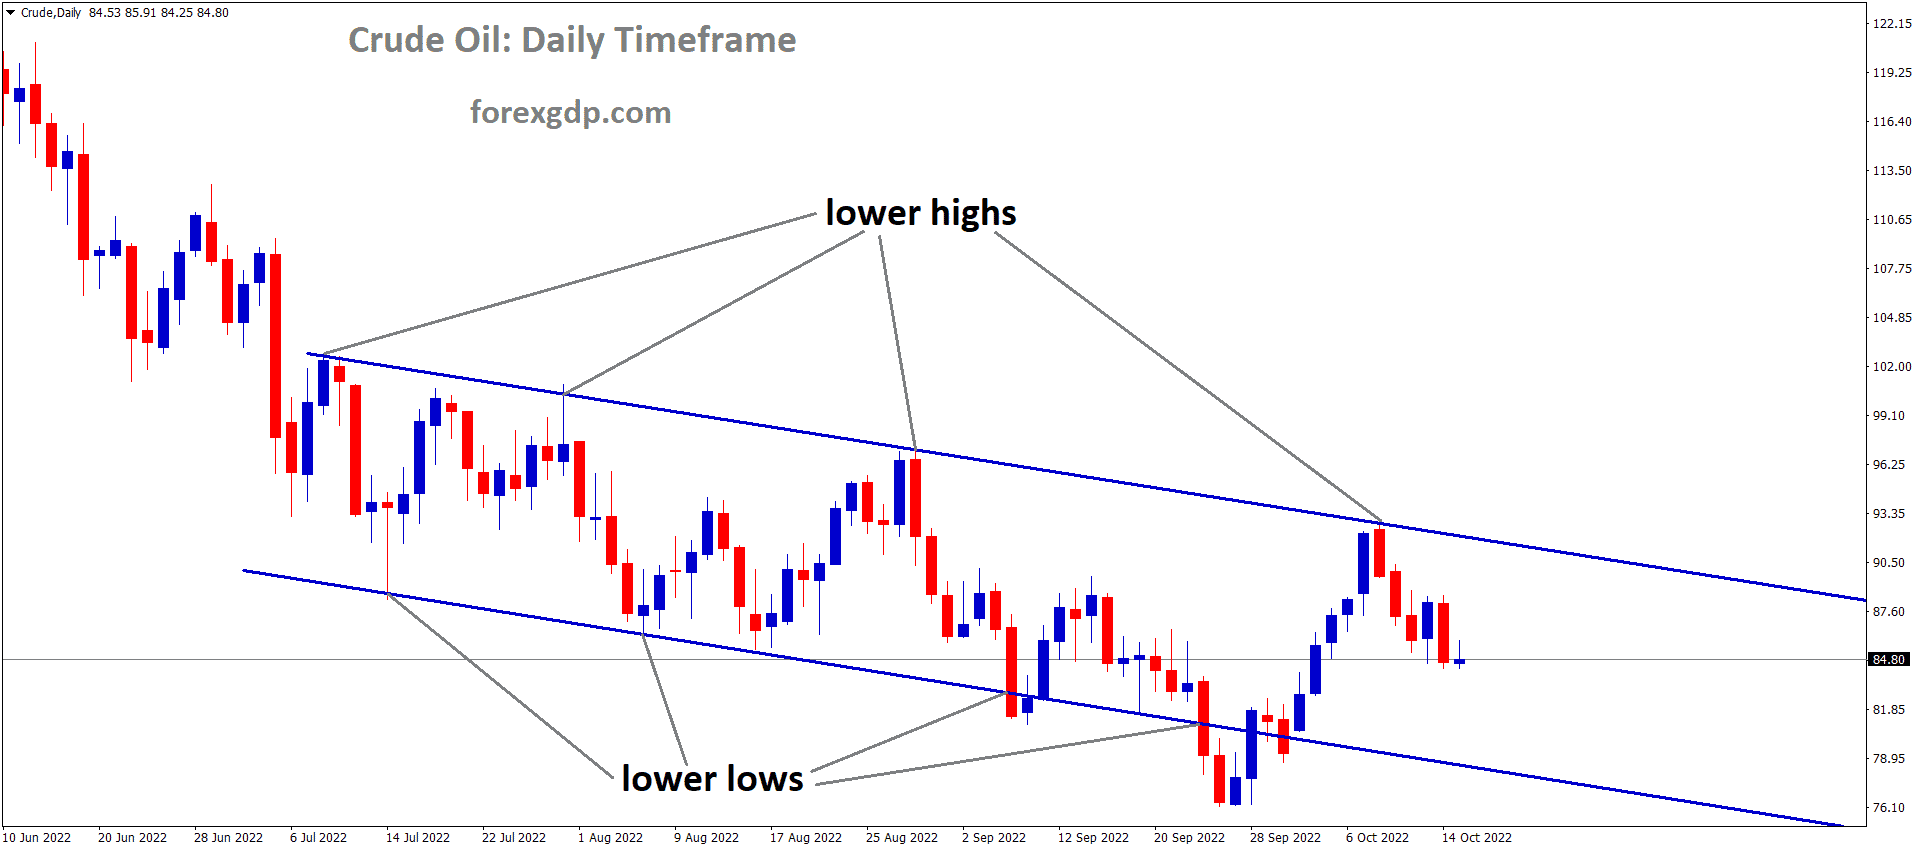 Crude Oil is moving in the Descending channel and the market has fallen from the lower high area of the channel